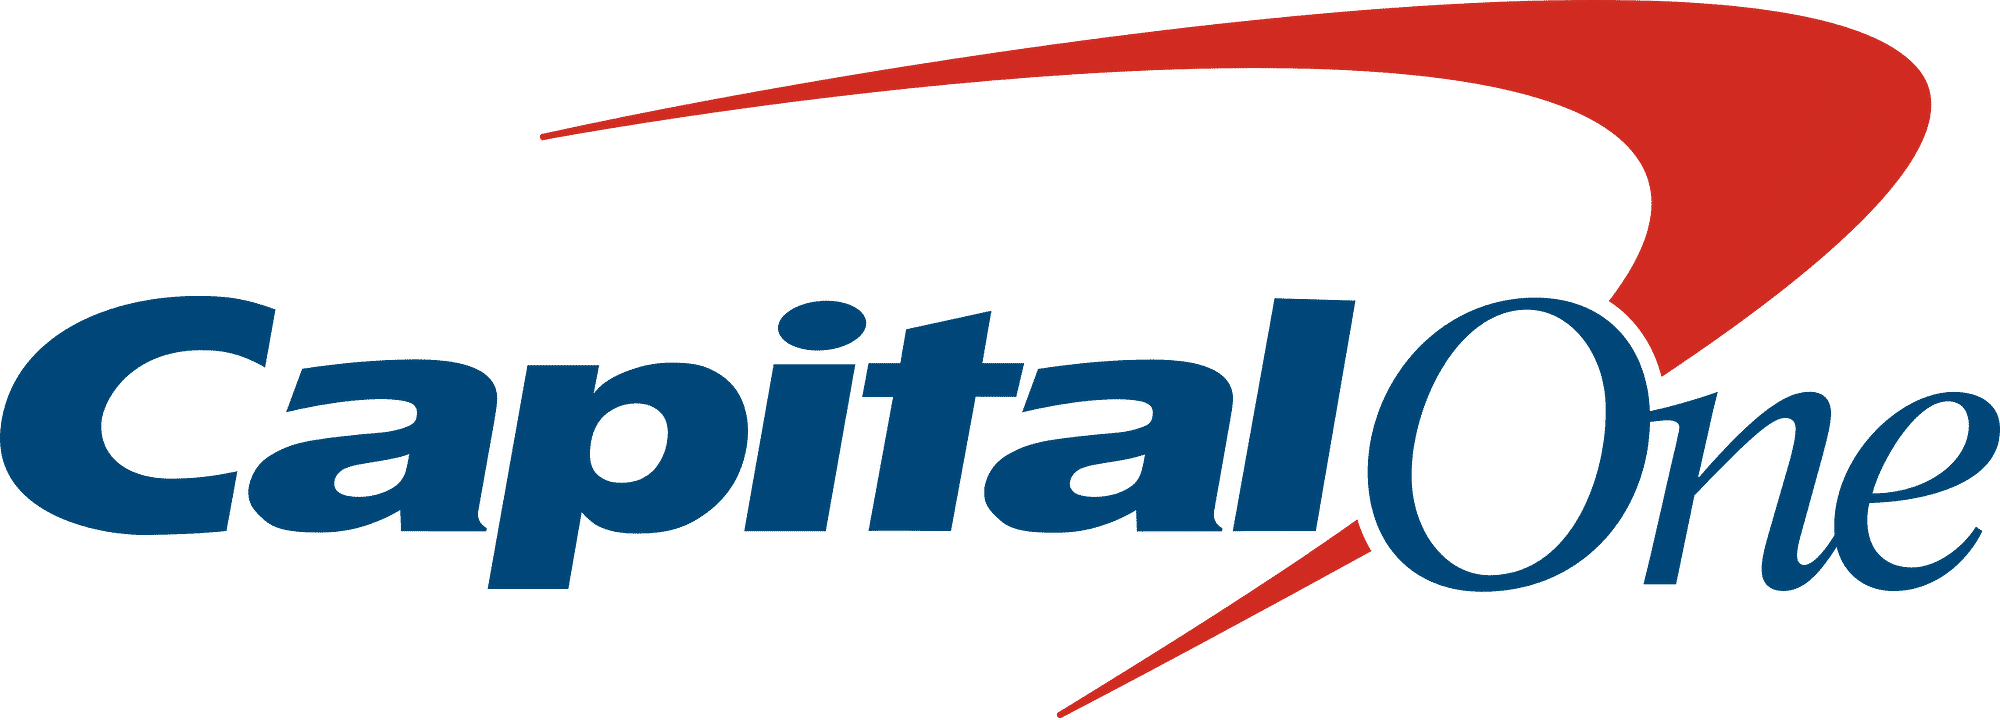 Capital One 360 CD Rates How Do they Compare?